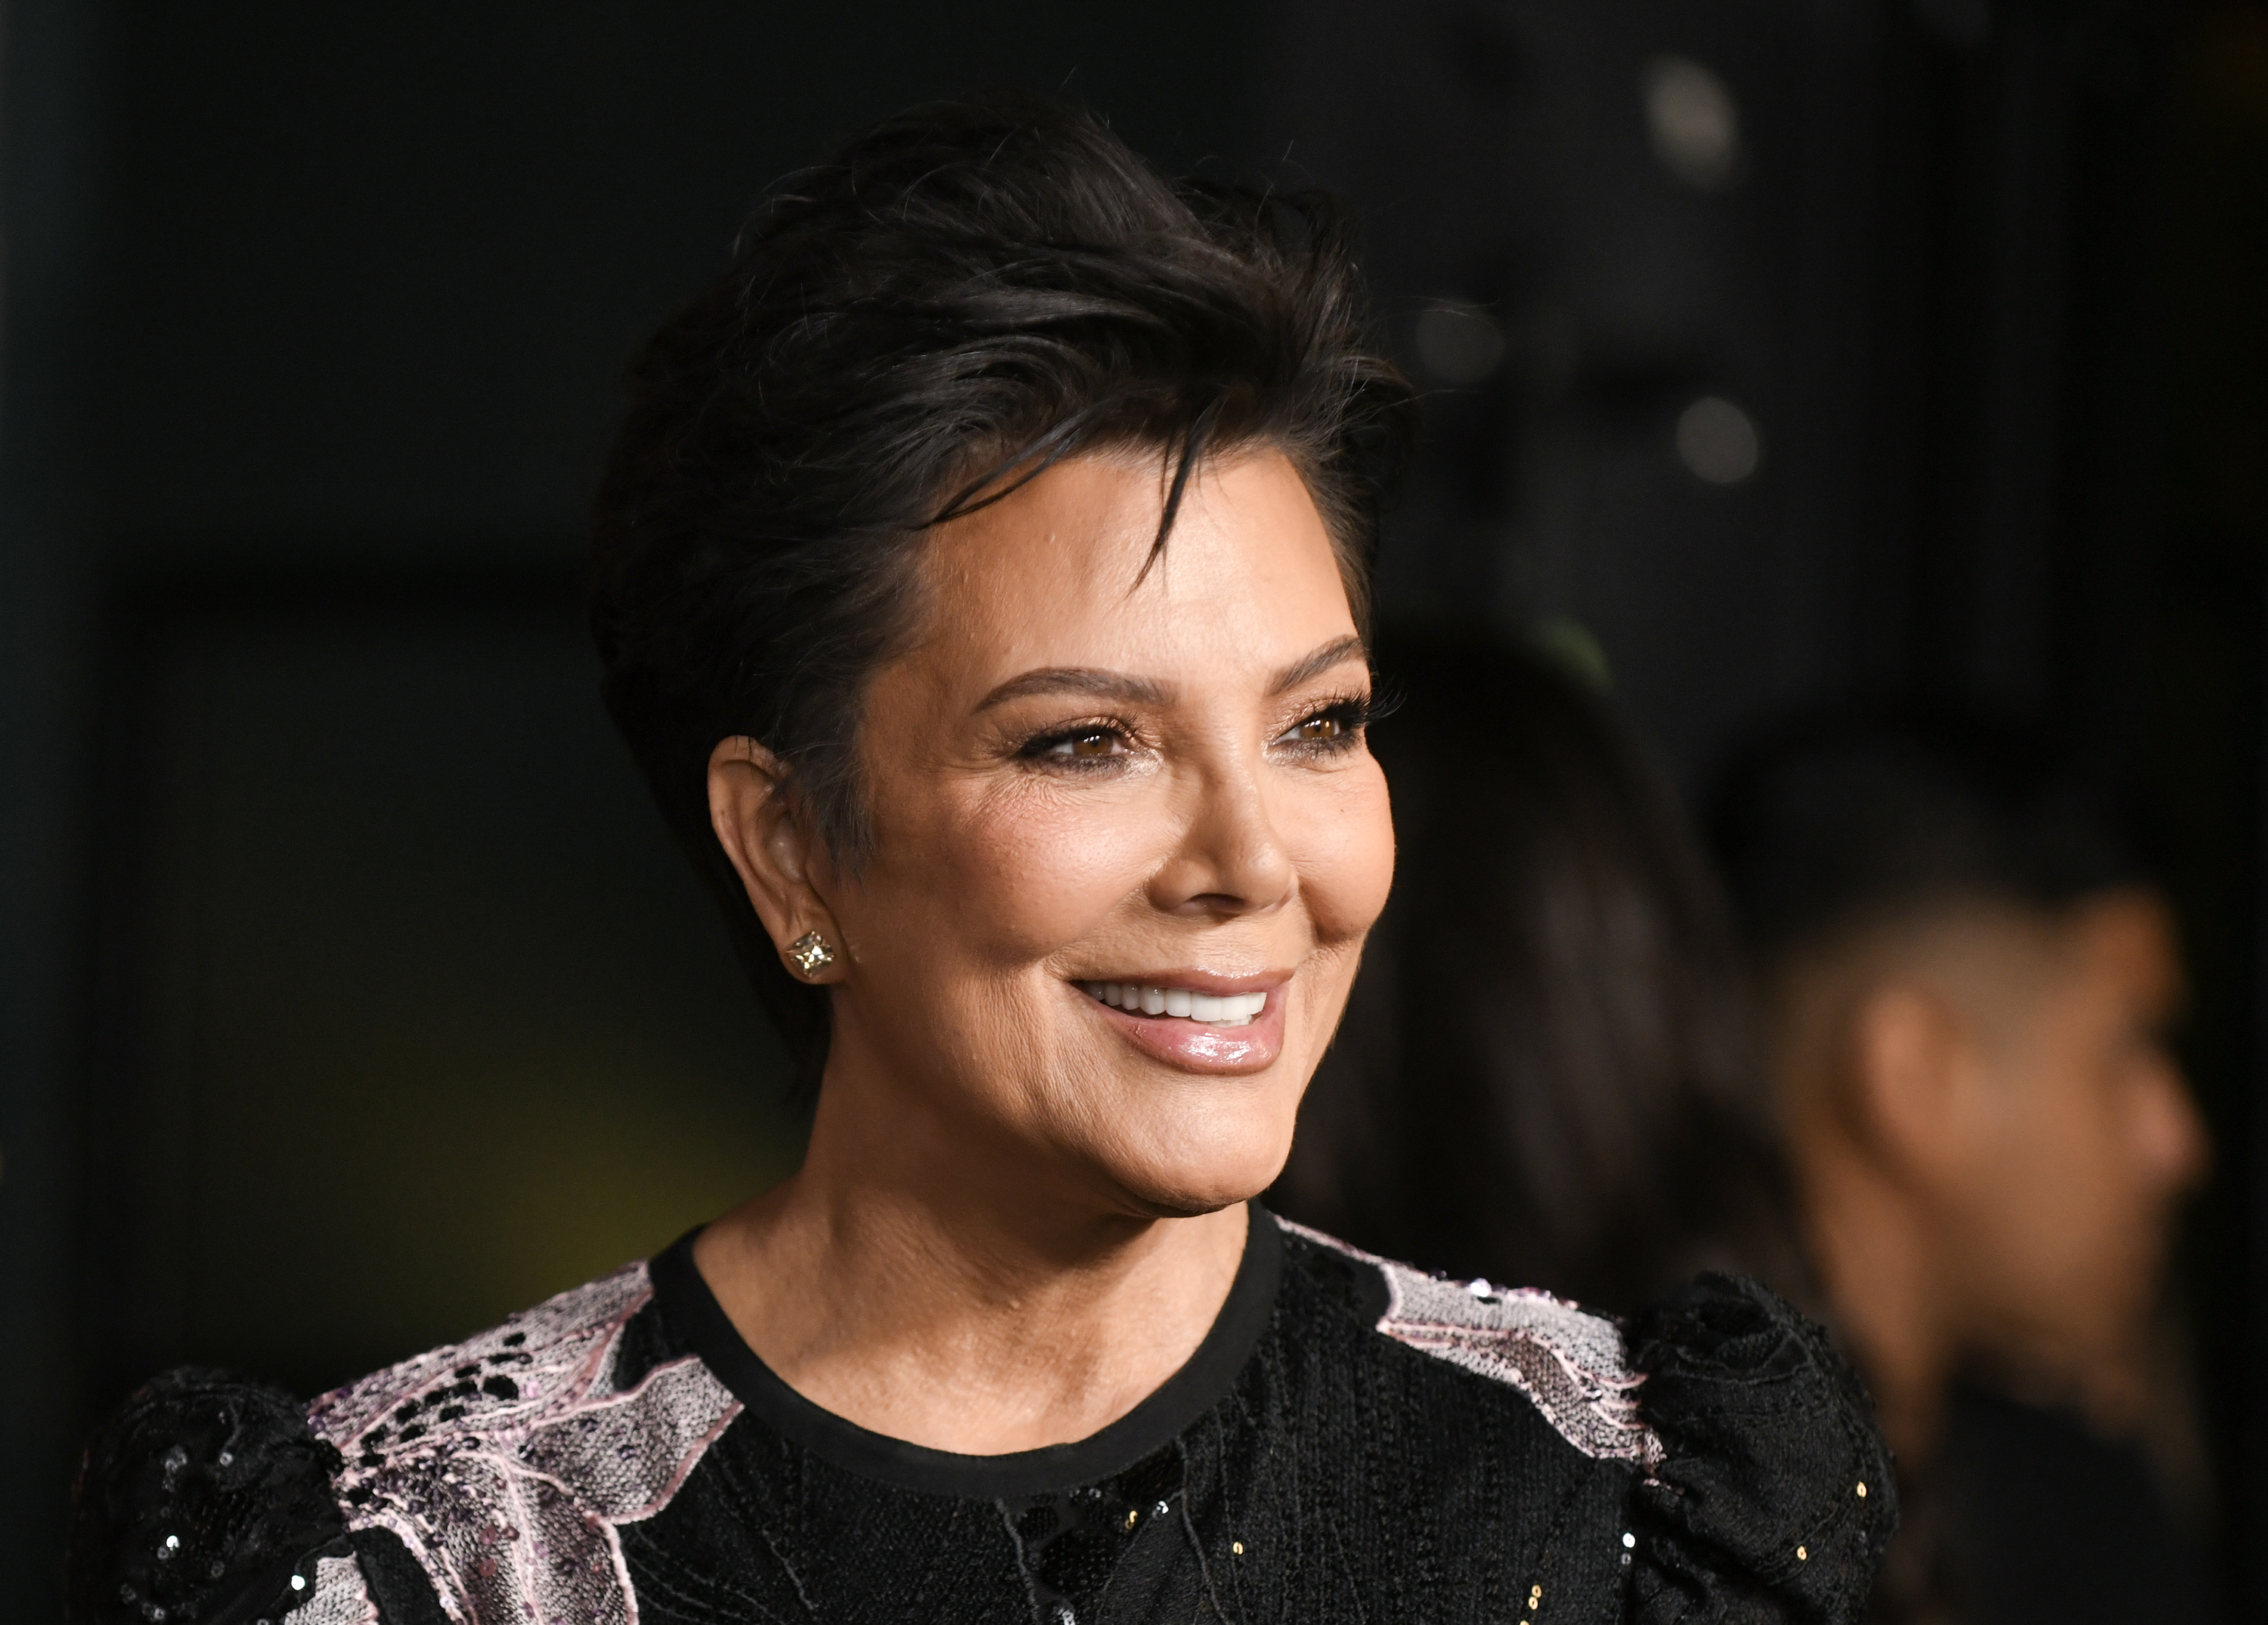 Along Dylan's kitchen sink was a product that might be found in Kris Jenner's home